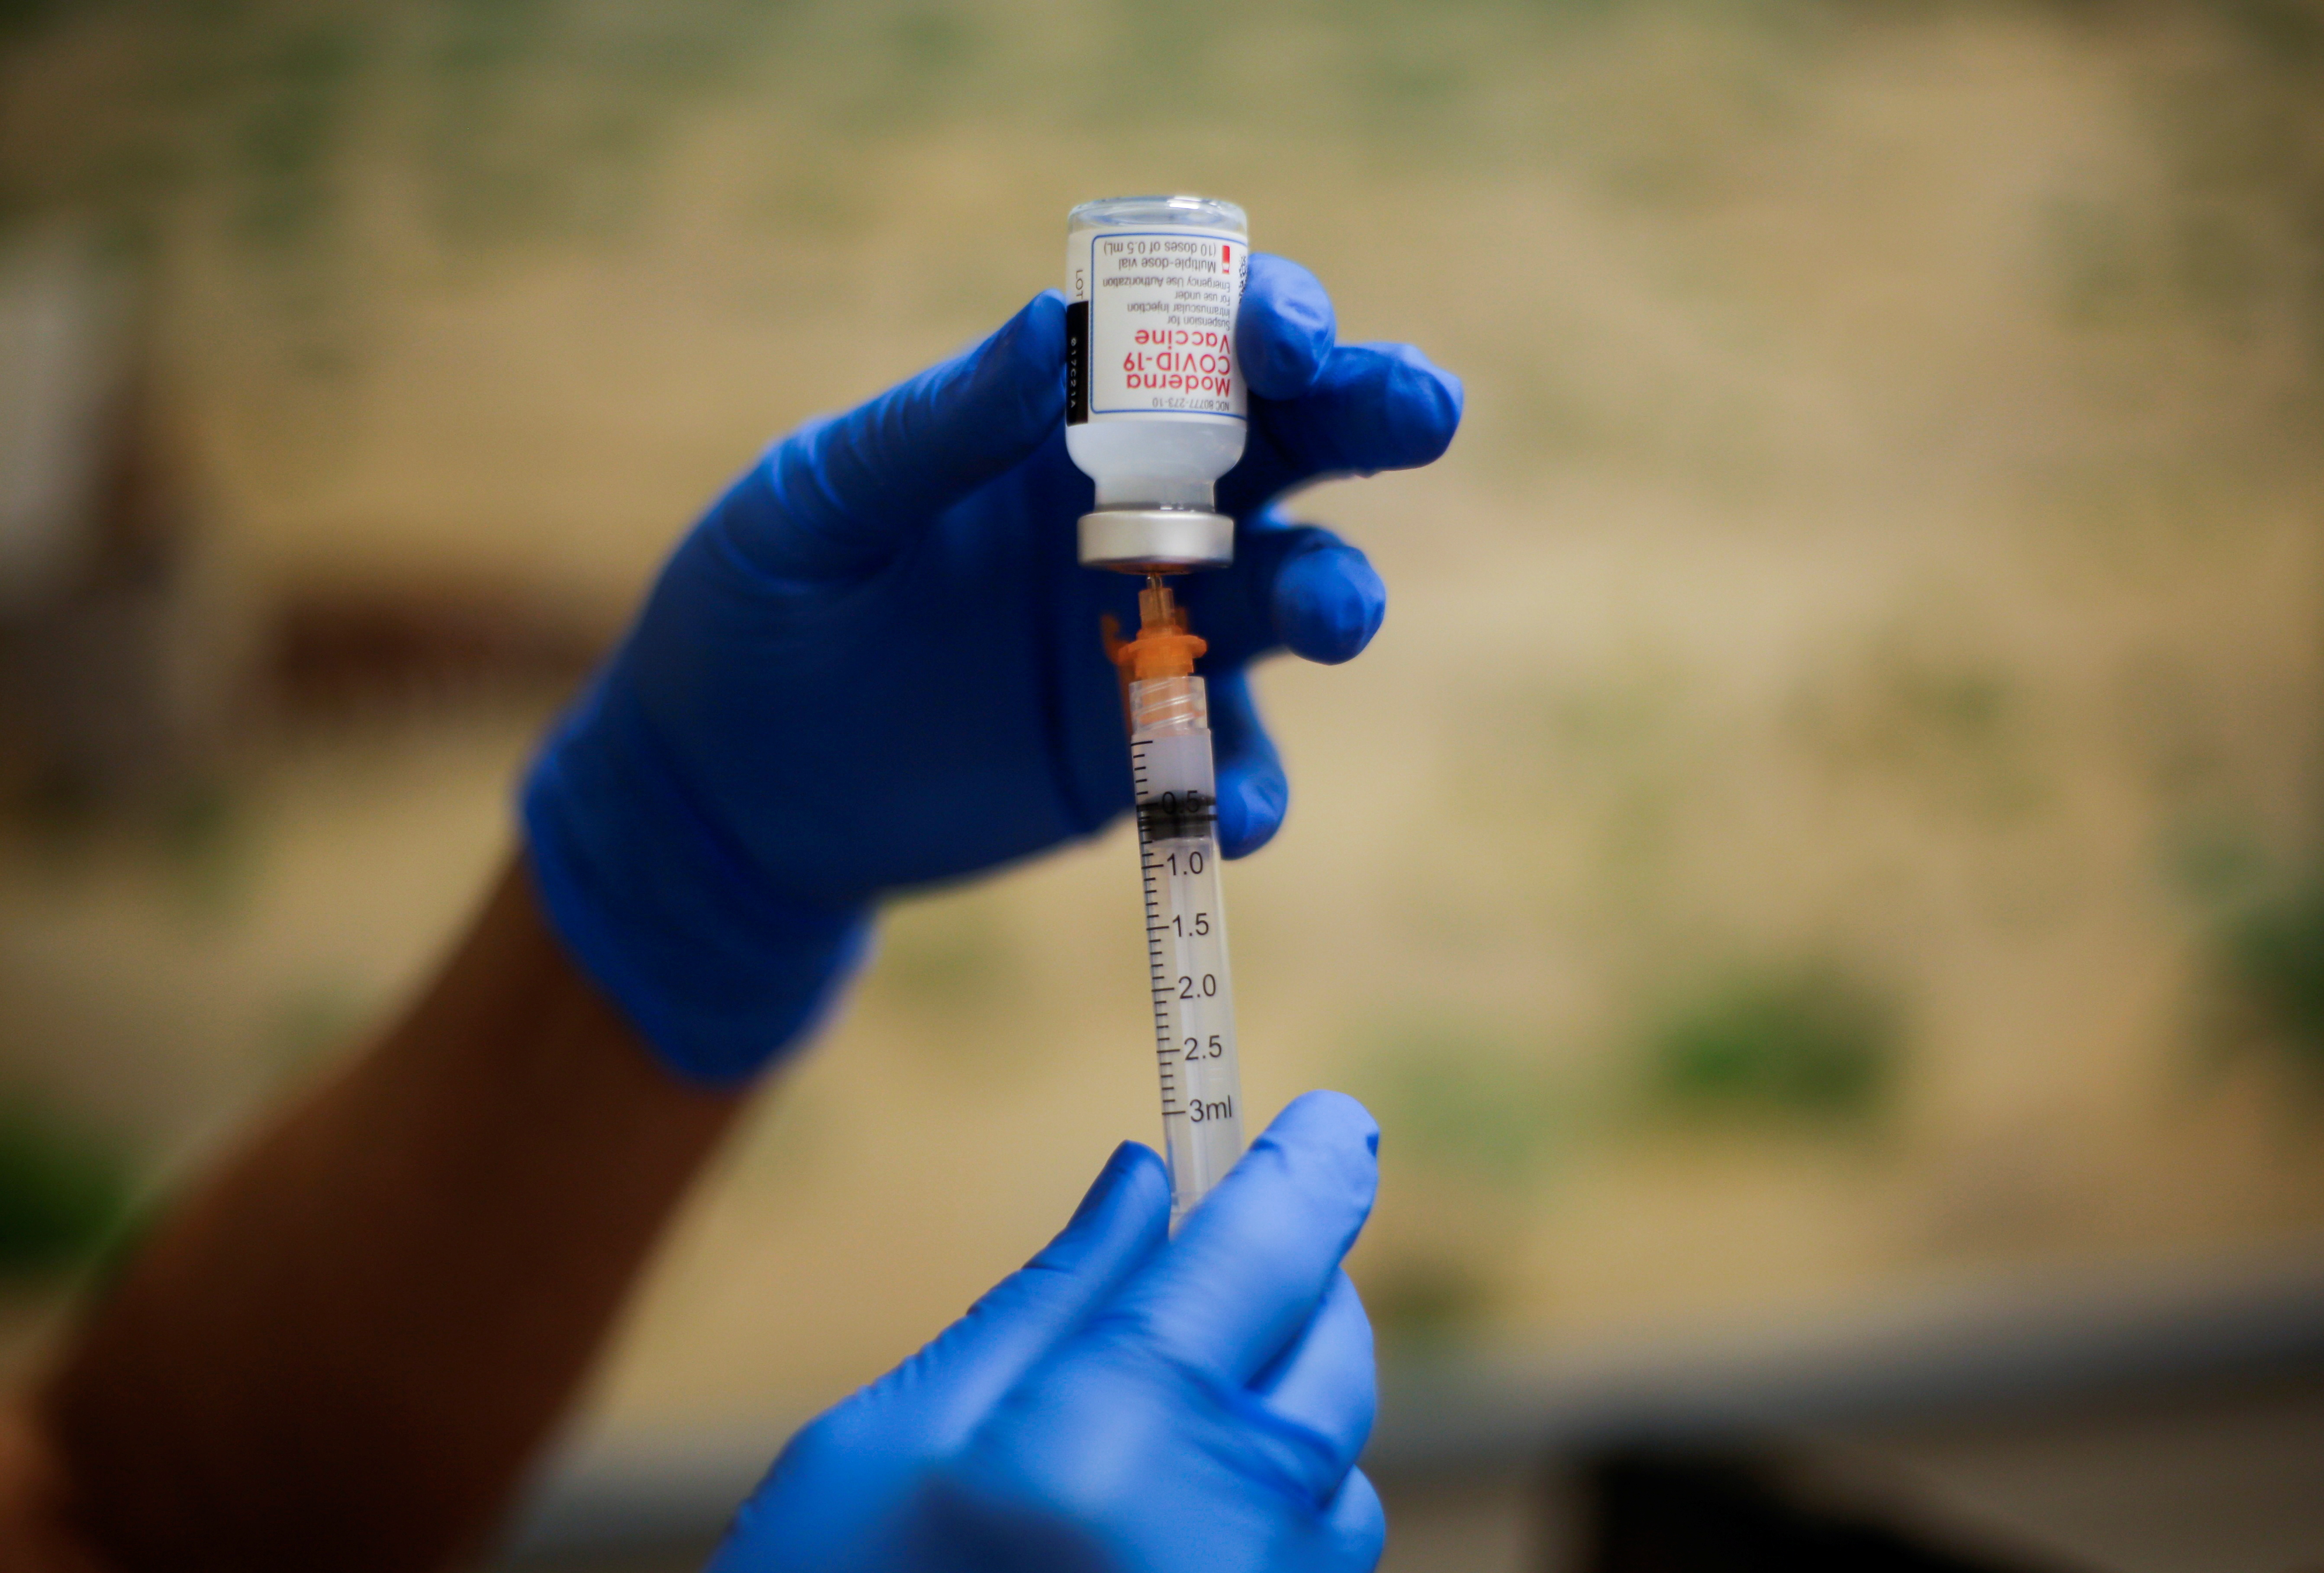 A healthcare worker prepares the Moderna vaccine against the coronavirus disease (COVID-19) at a vaccination centre, in El Paso